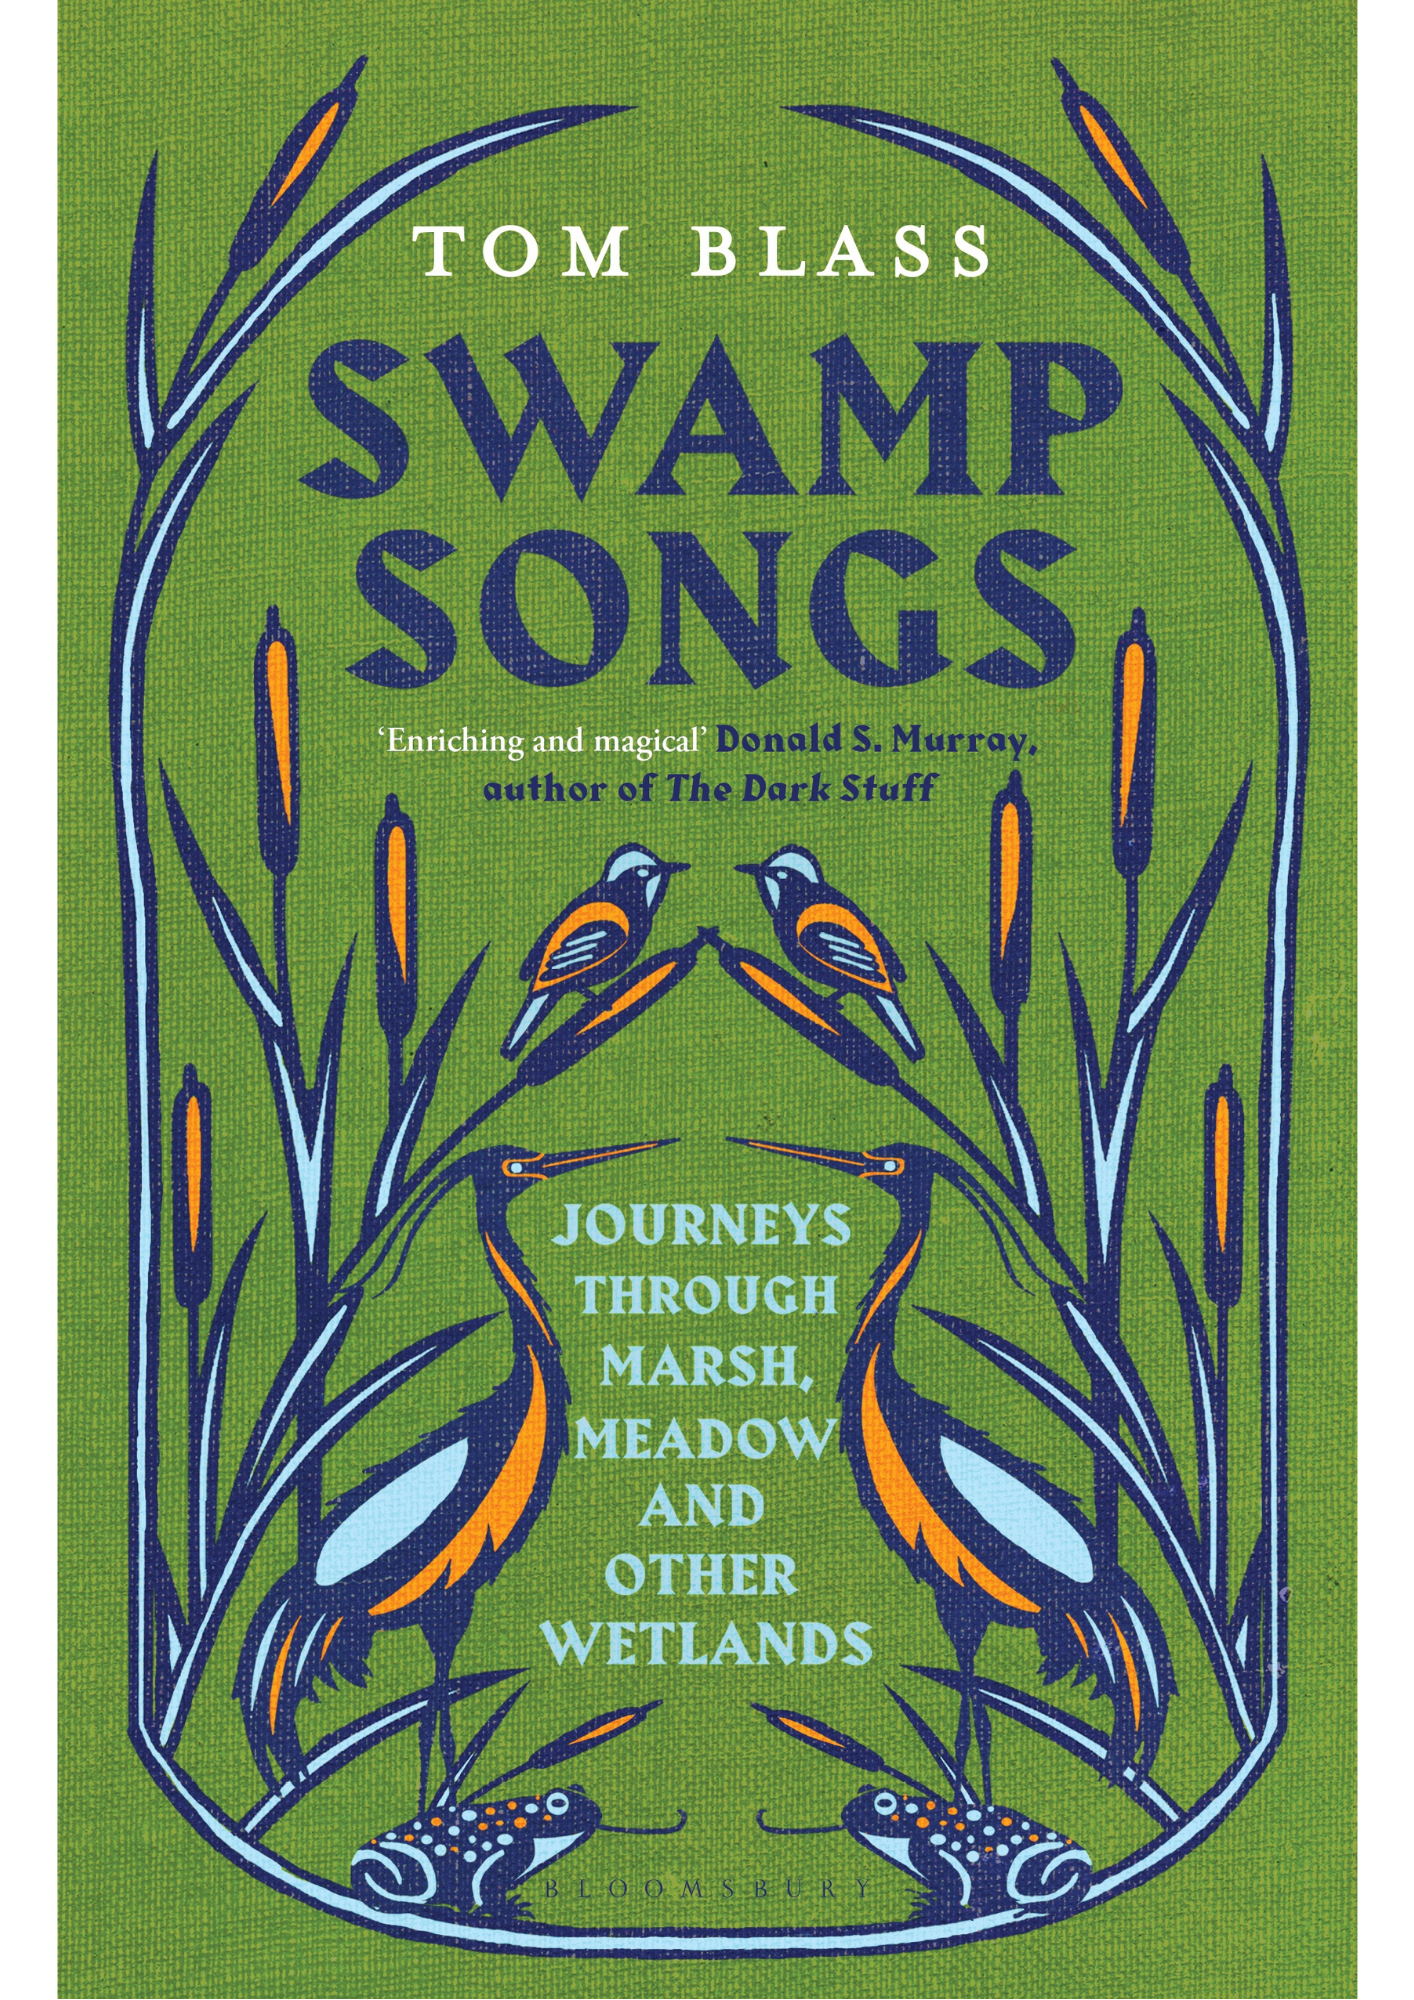 Frome Lit Fest: Swamp Songs: A Journey Through Marsh and Meadow with Tom Blass